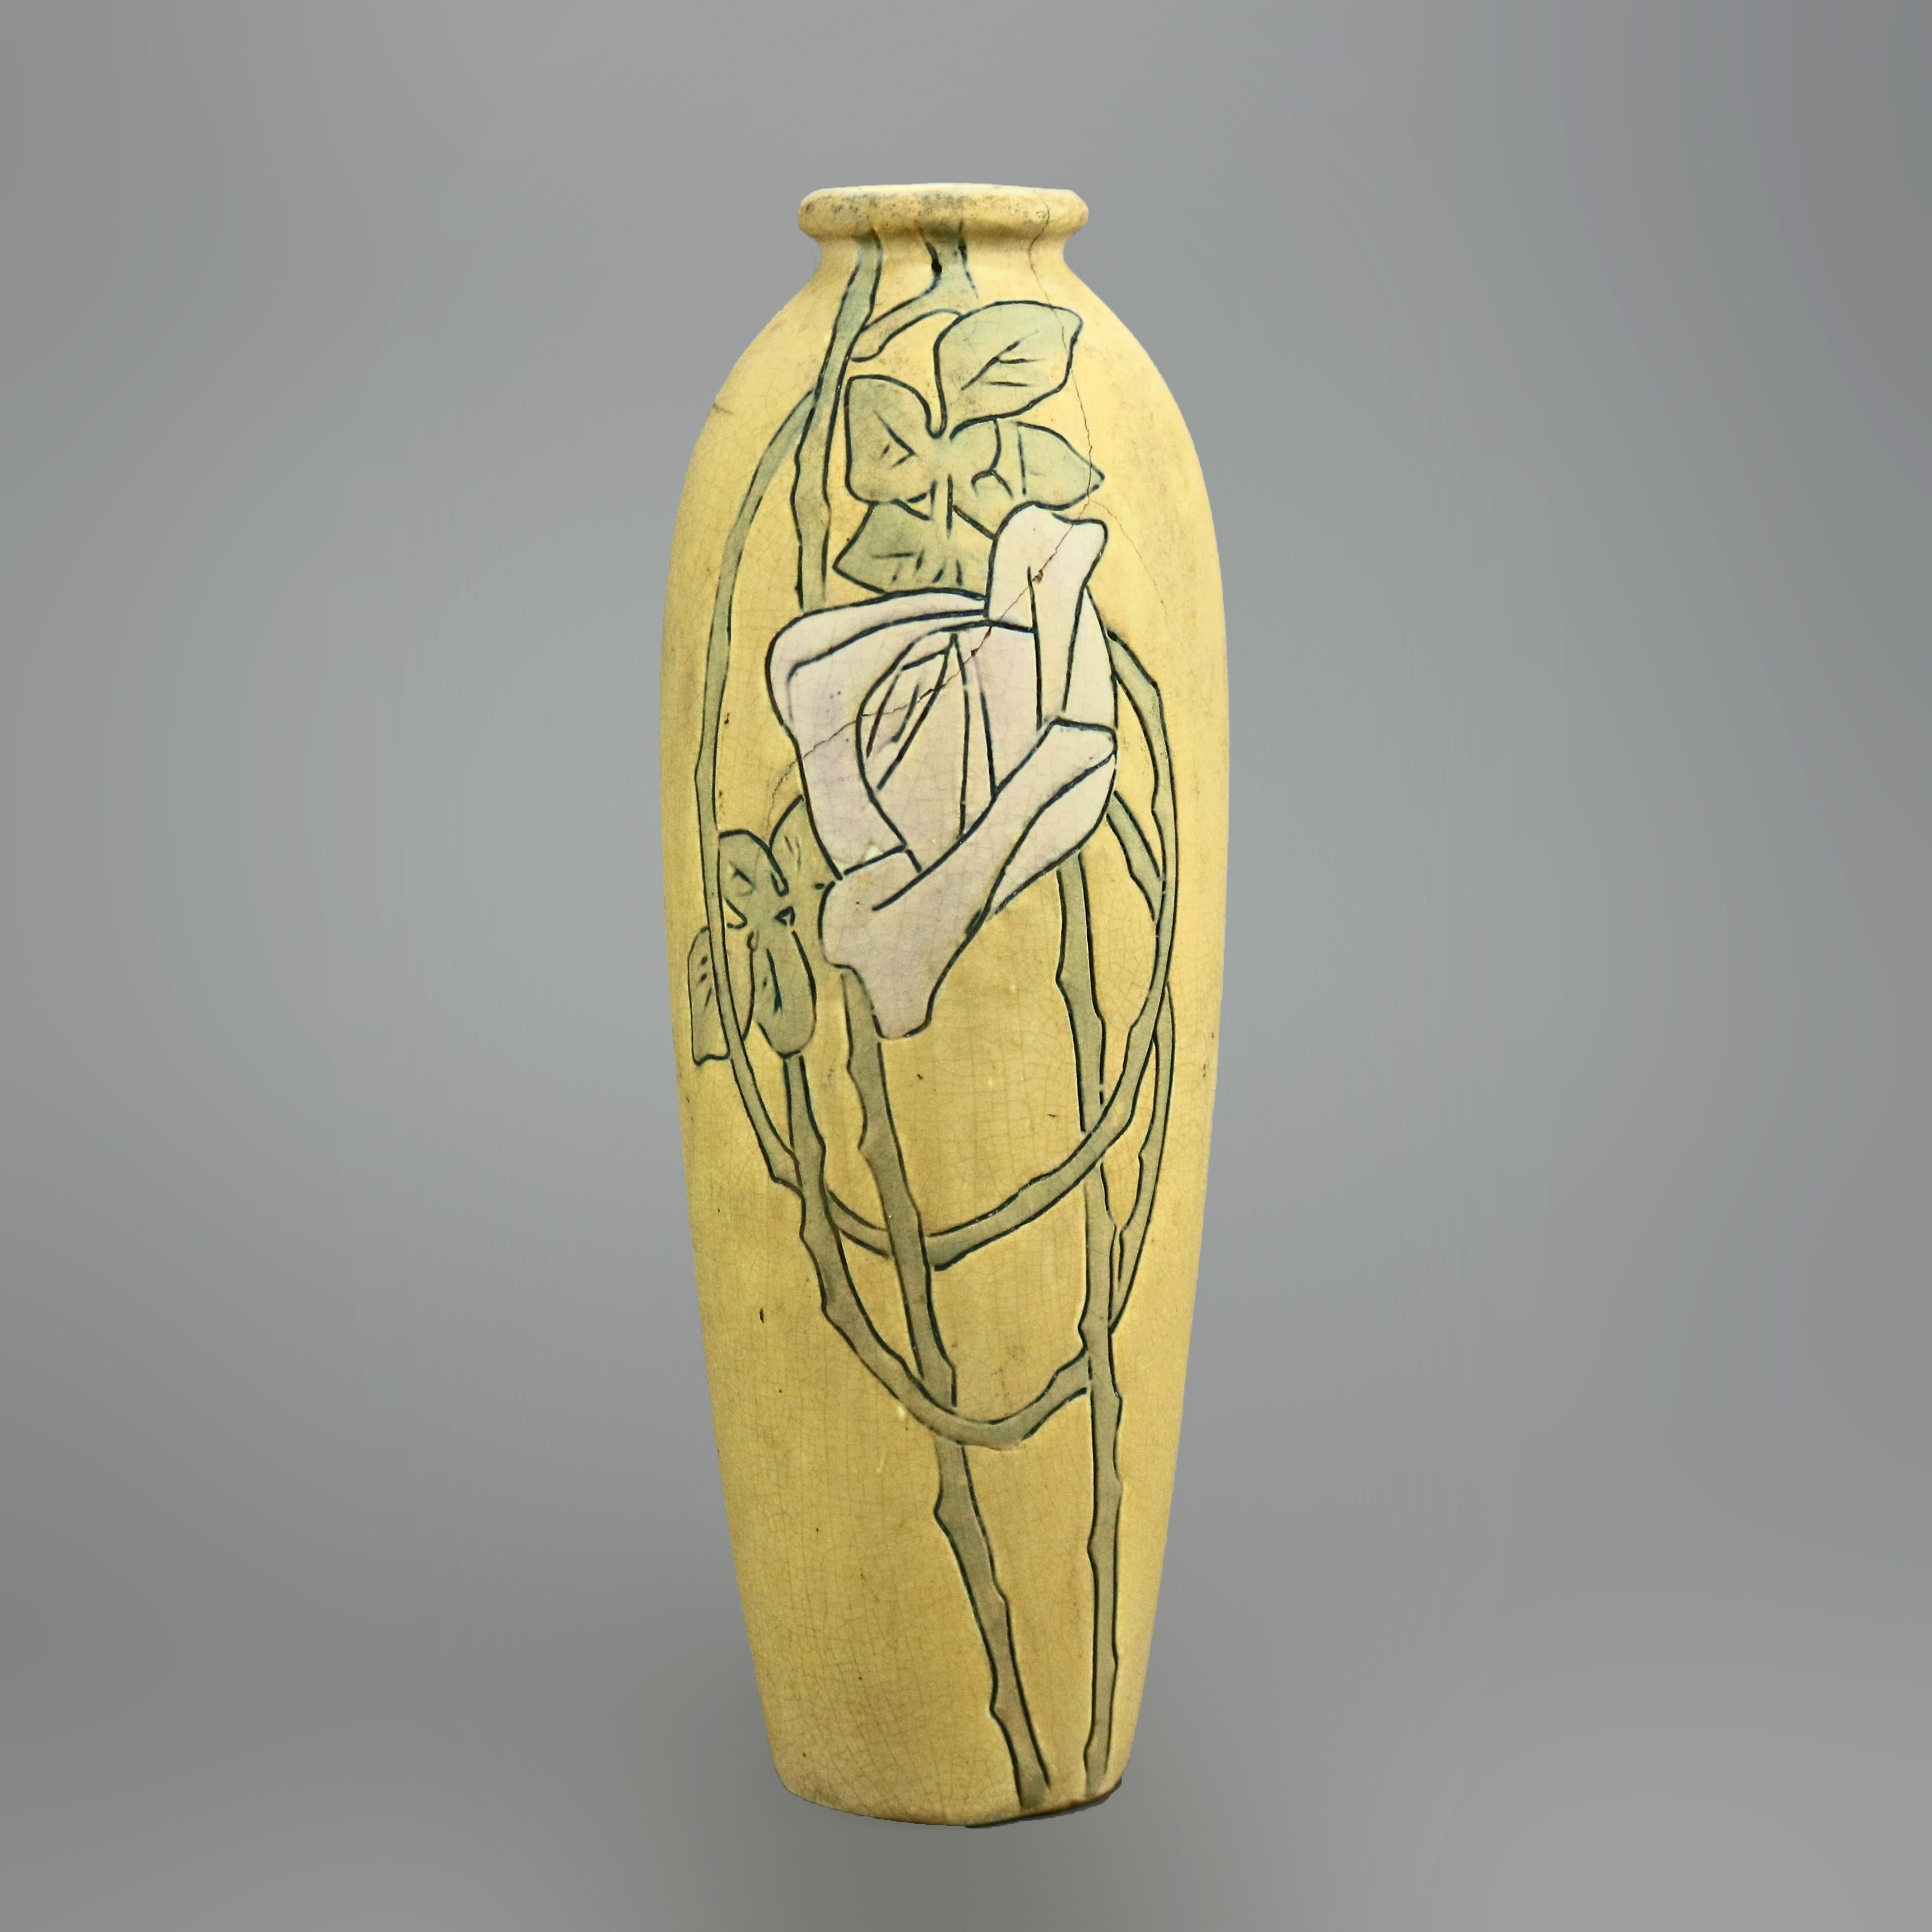 An Arts and Crafts vase by Weller offers art pottery construction with incised stylized flower, matt glaze, maker on base, c1920

Measures- 10.25''h x 3.5''w x 3.5''d.

Catalogue Note: Ask about DISCOUNTED DELIVERY RATES available to most regions